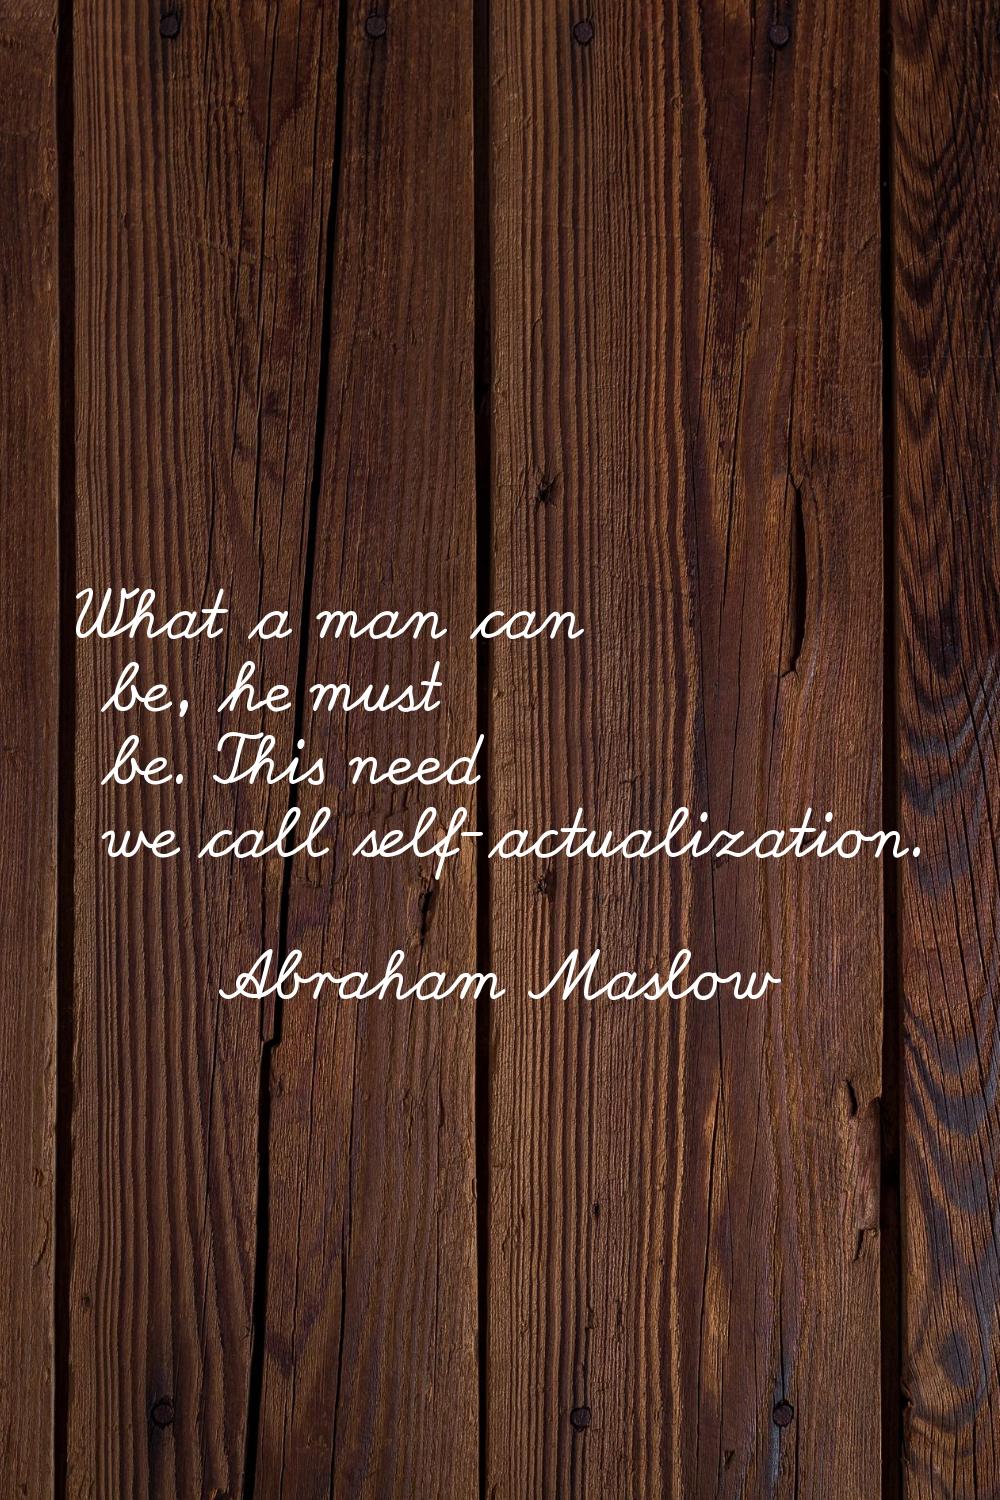 What a man can be, he must be. This need we call self-actualization.